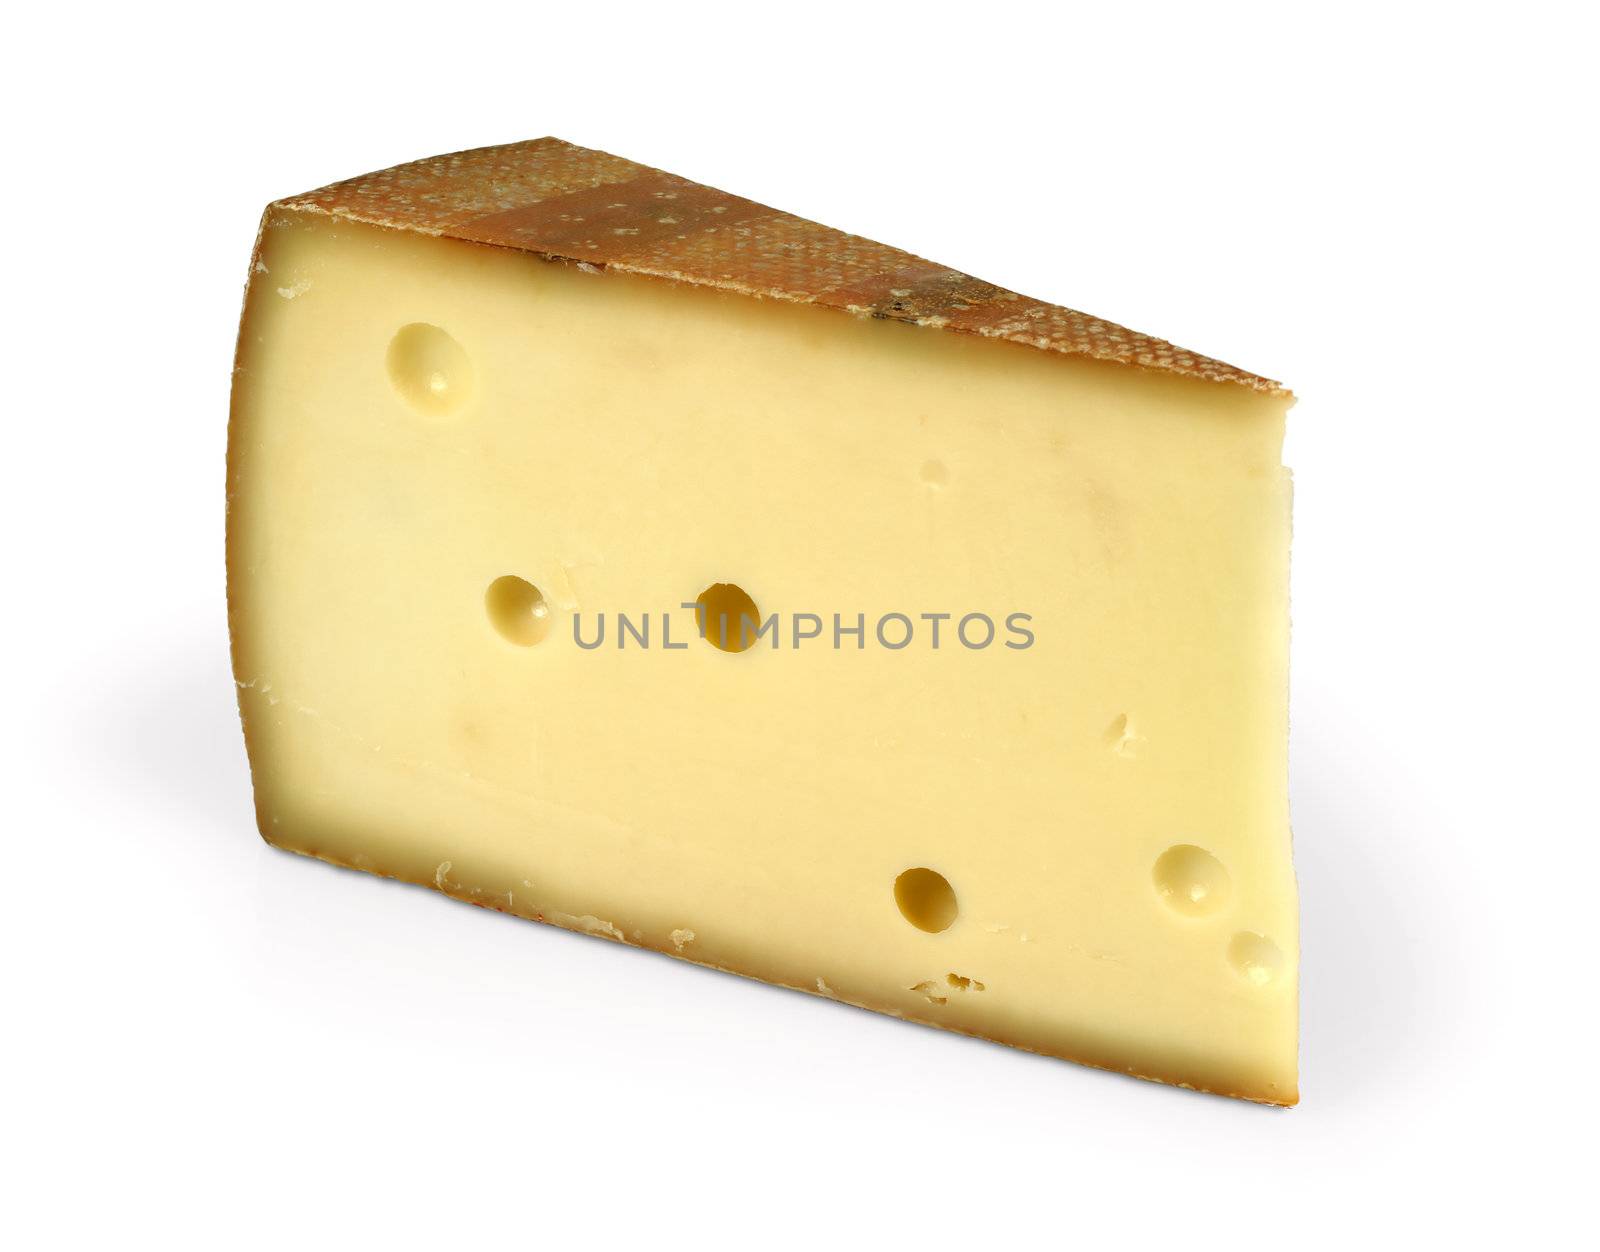 A big wedge of Swiss cheese. Isolated image with clipping path included.
